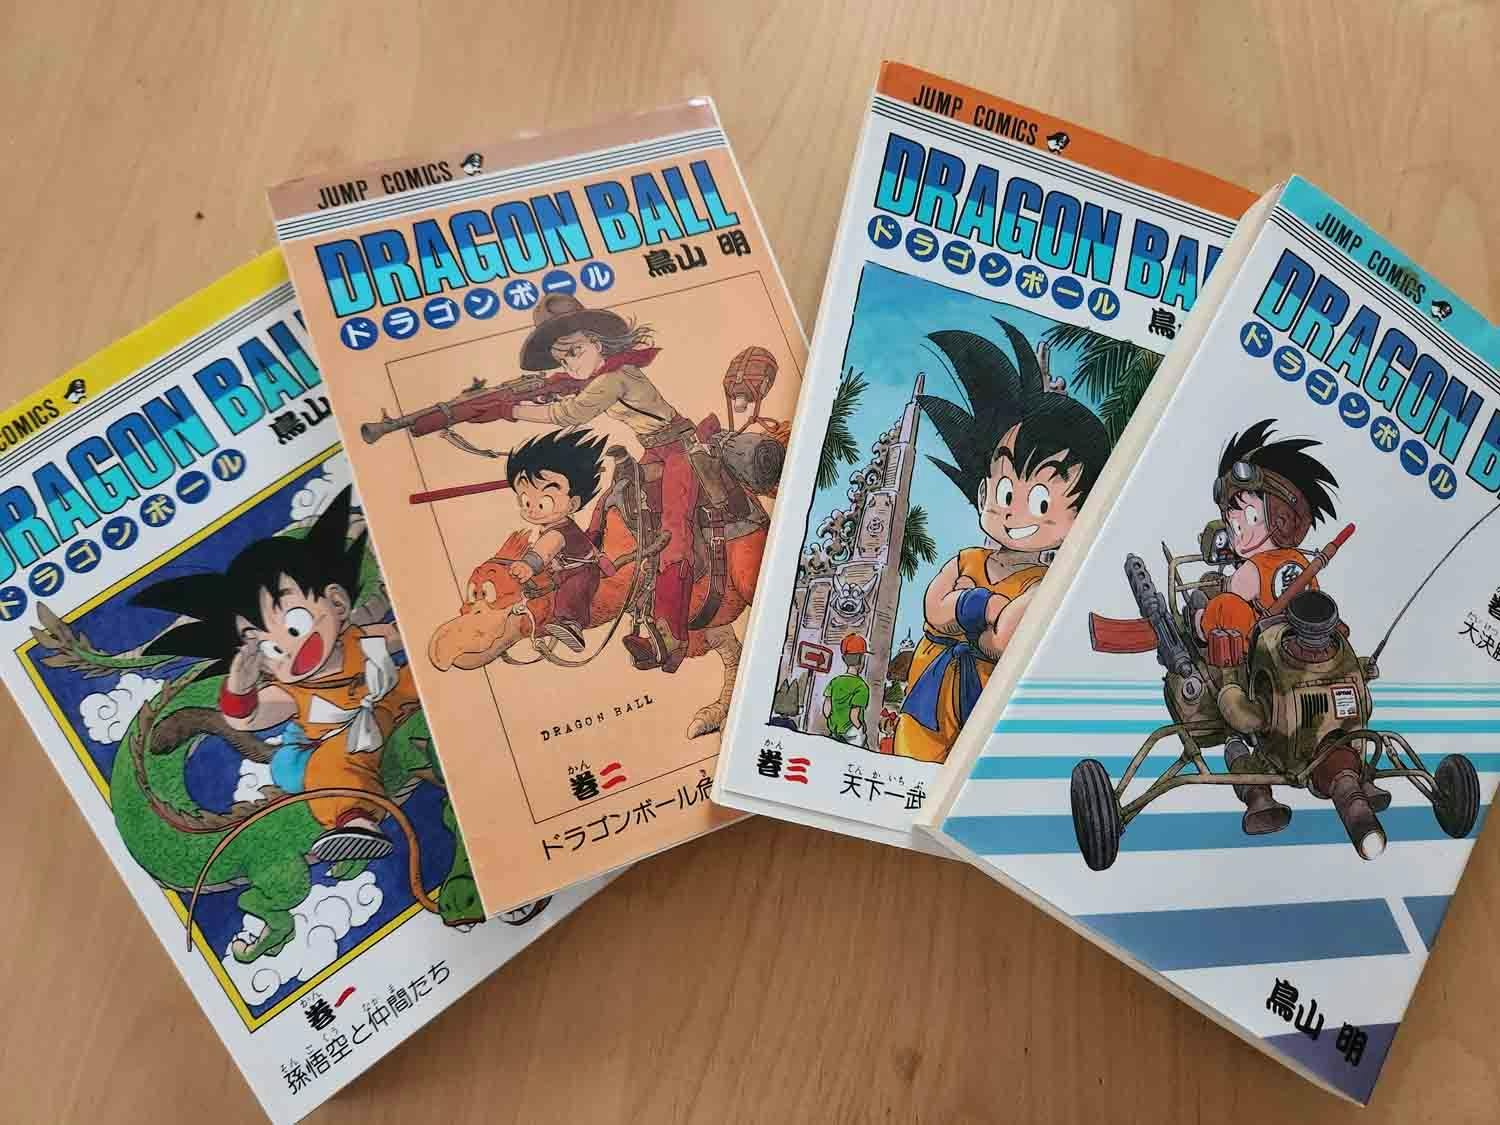 Dragon Ball: The first four comic books. Photo source: James Saunders-Wyndham